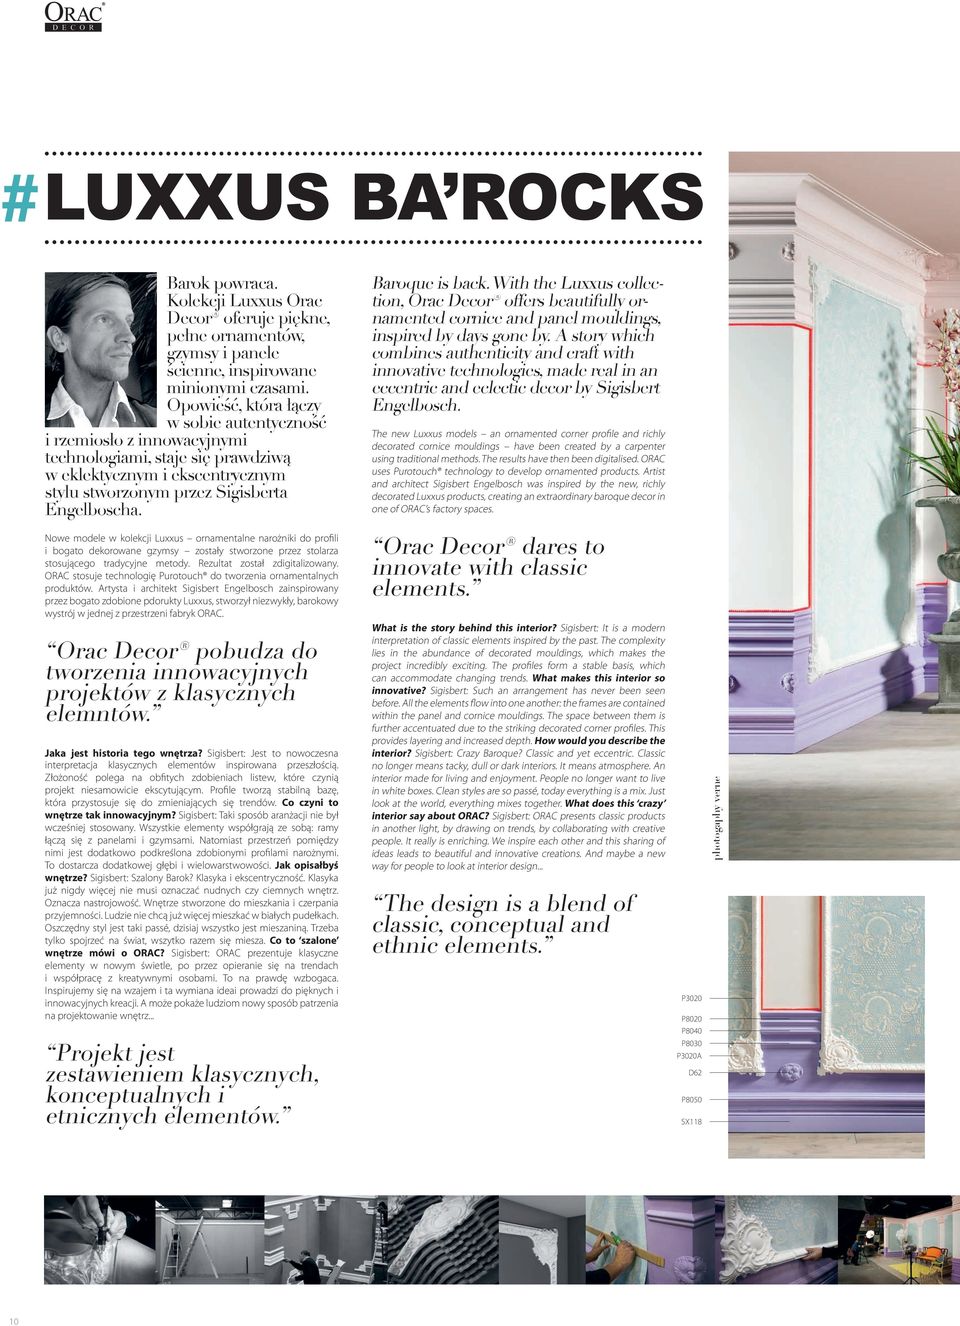 Baroque is back. With the Luxxus collection, Orac Decor offers beautifully ornamented cornice and panel mouldings, inspired by days gone by.